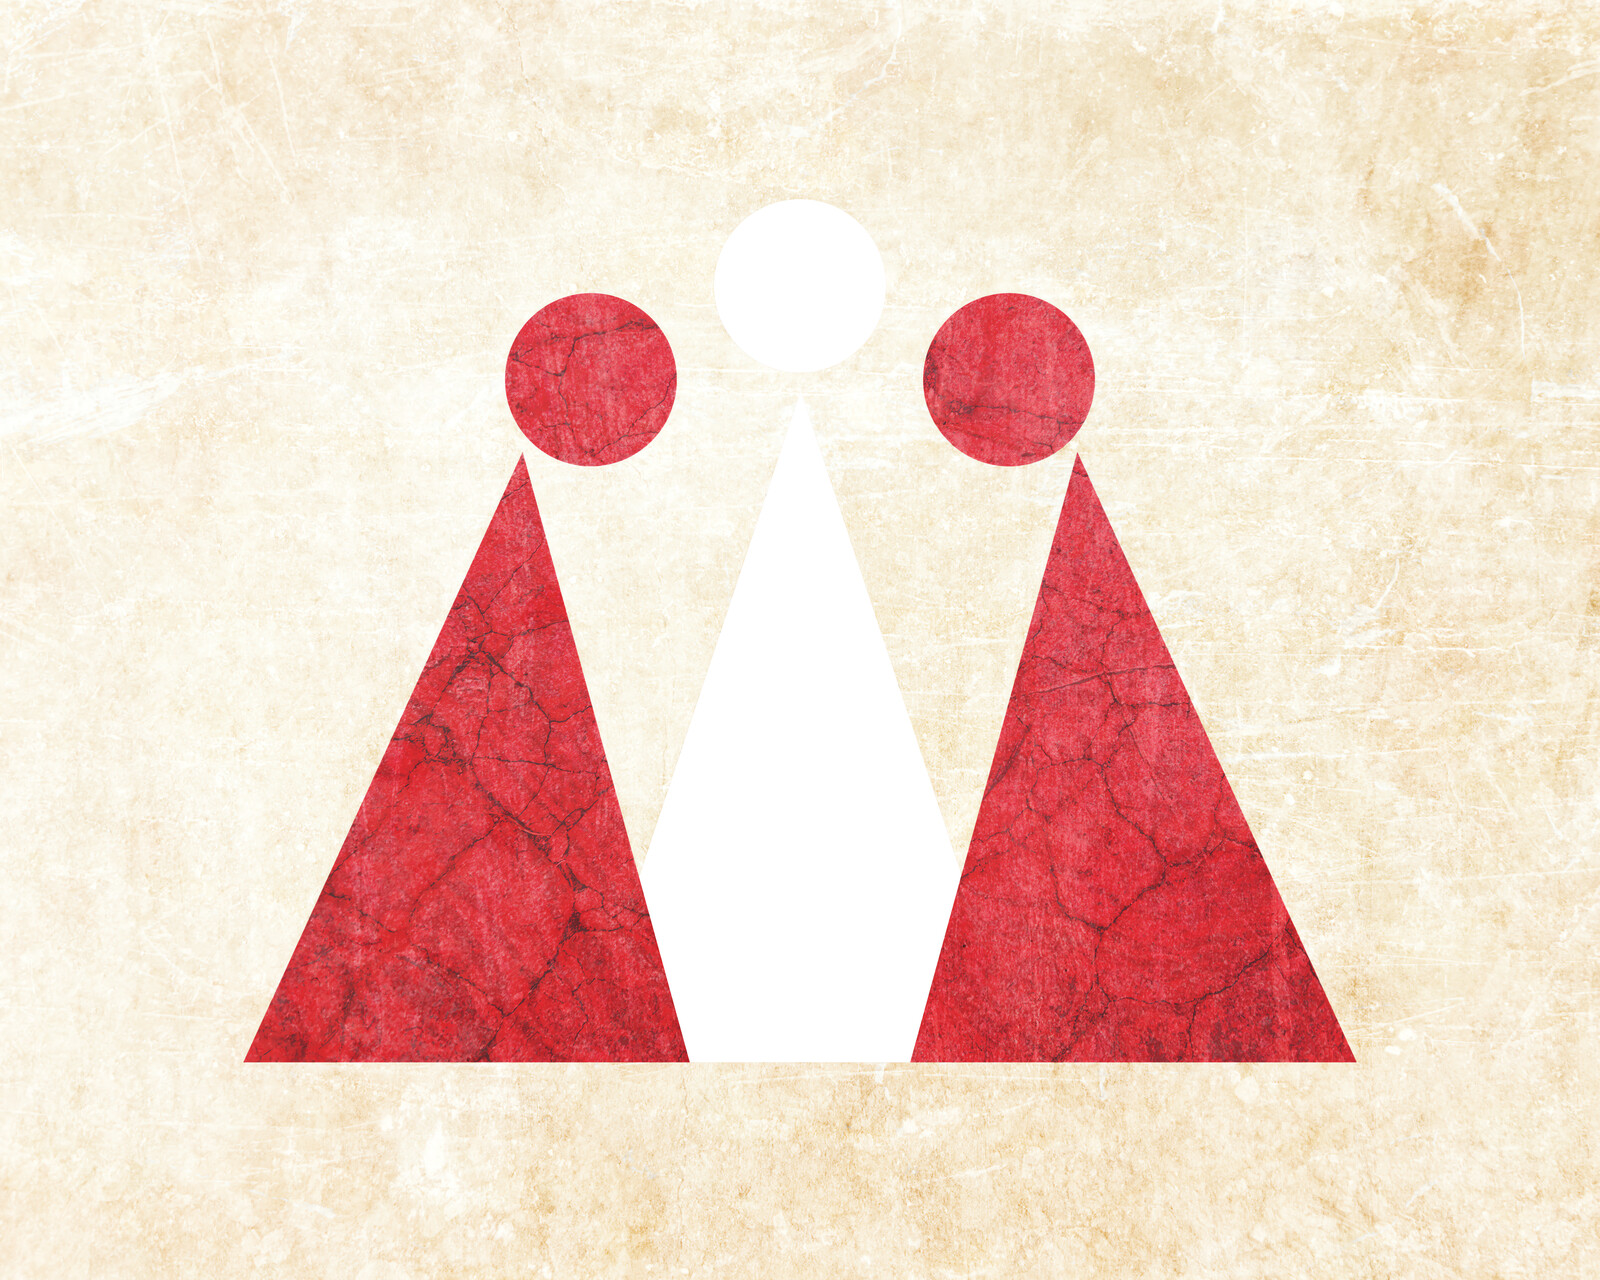 Two red circle-and-triangle figures facing each other, with a white circle-and-triangle figure between and behind them.